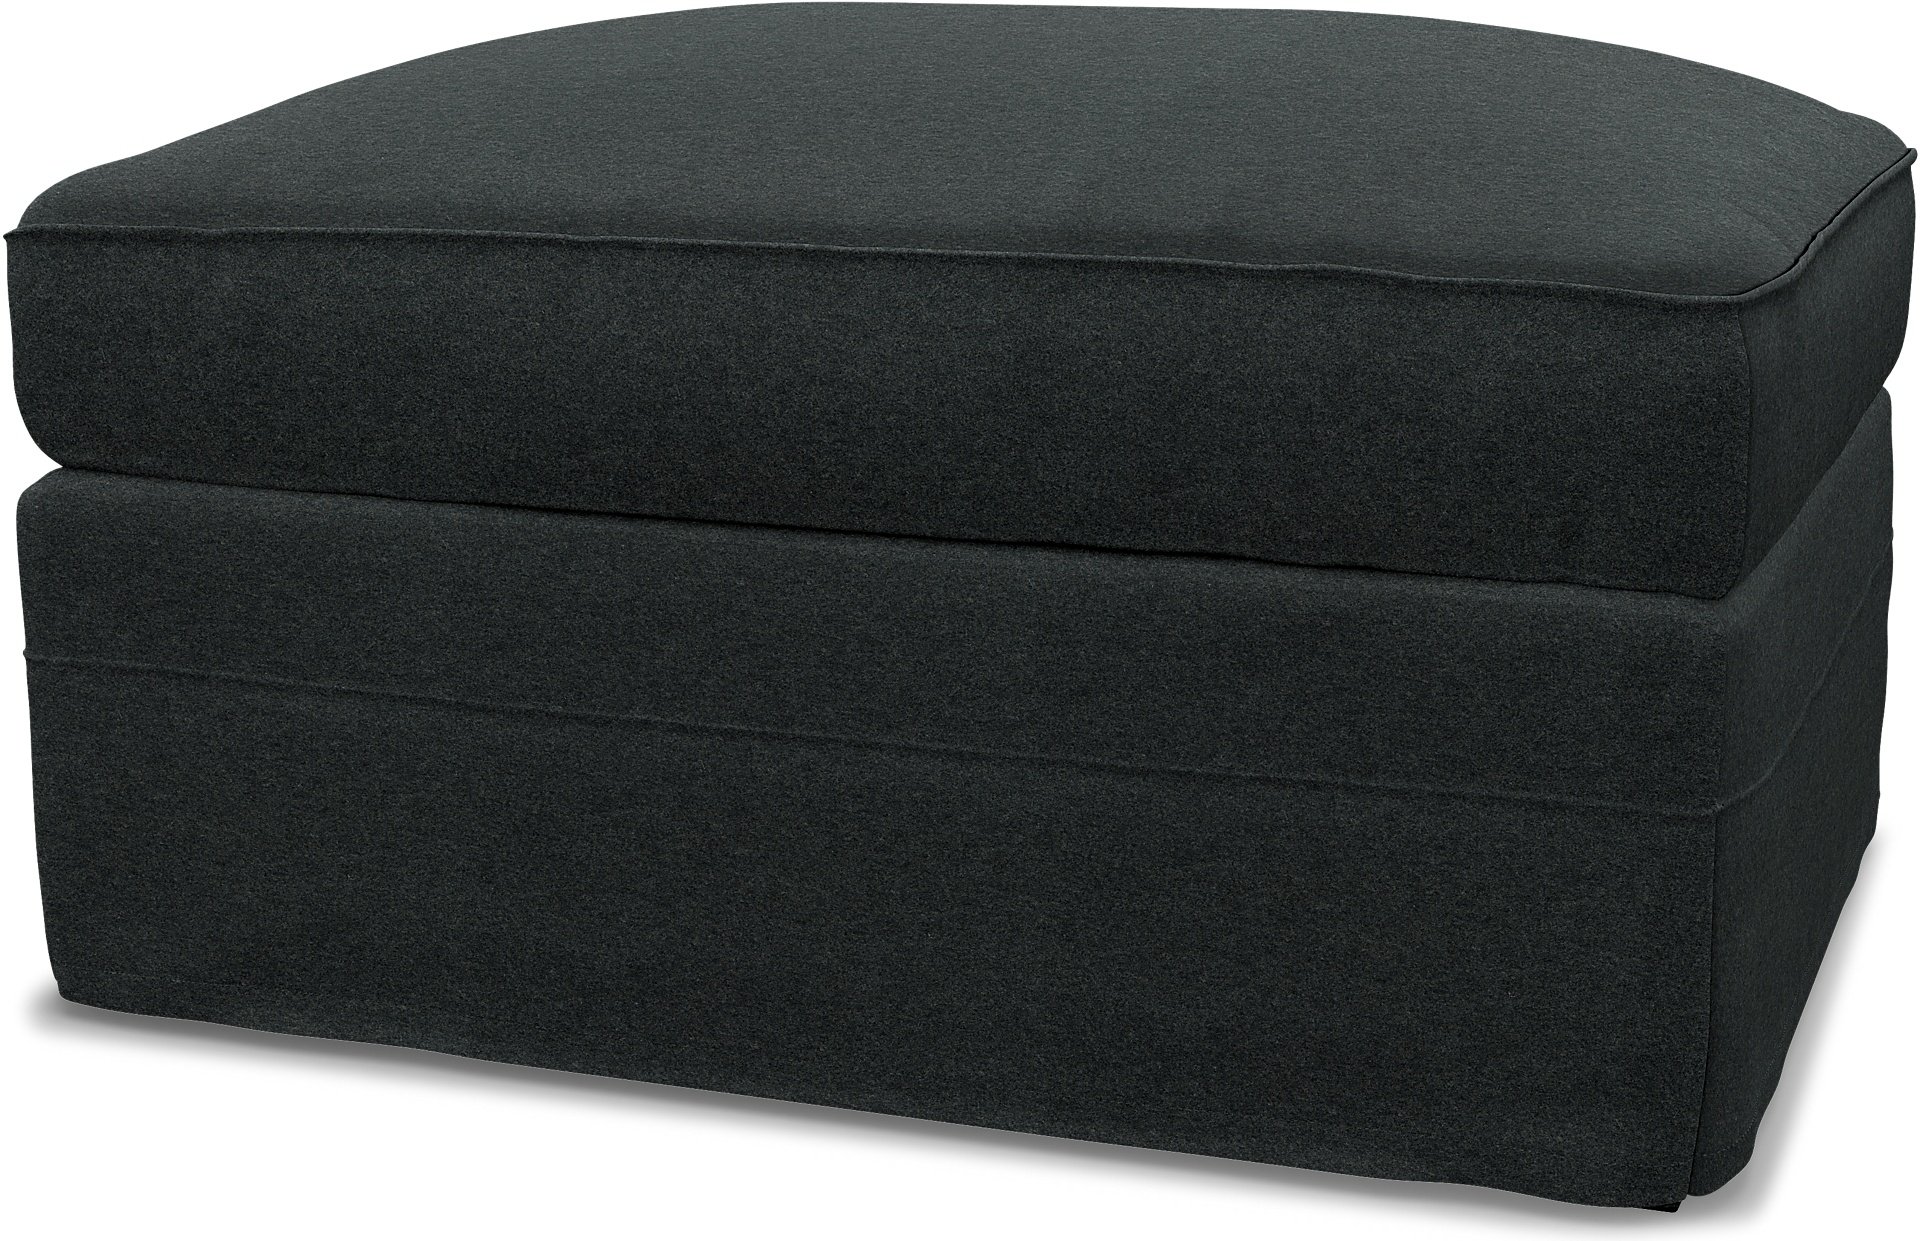 IKEA - Gronlid Footstool with Storage Cover, Stone, Wool - Bemz